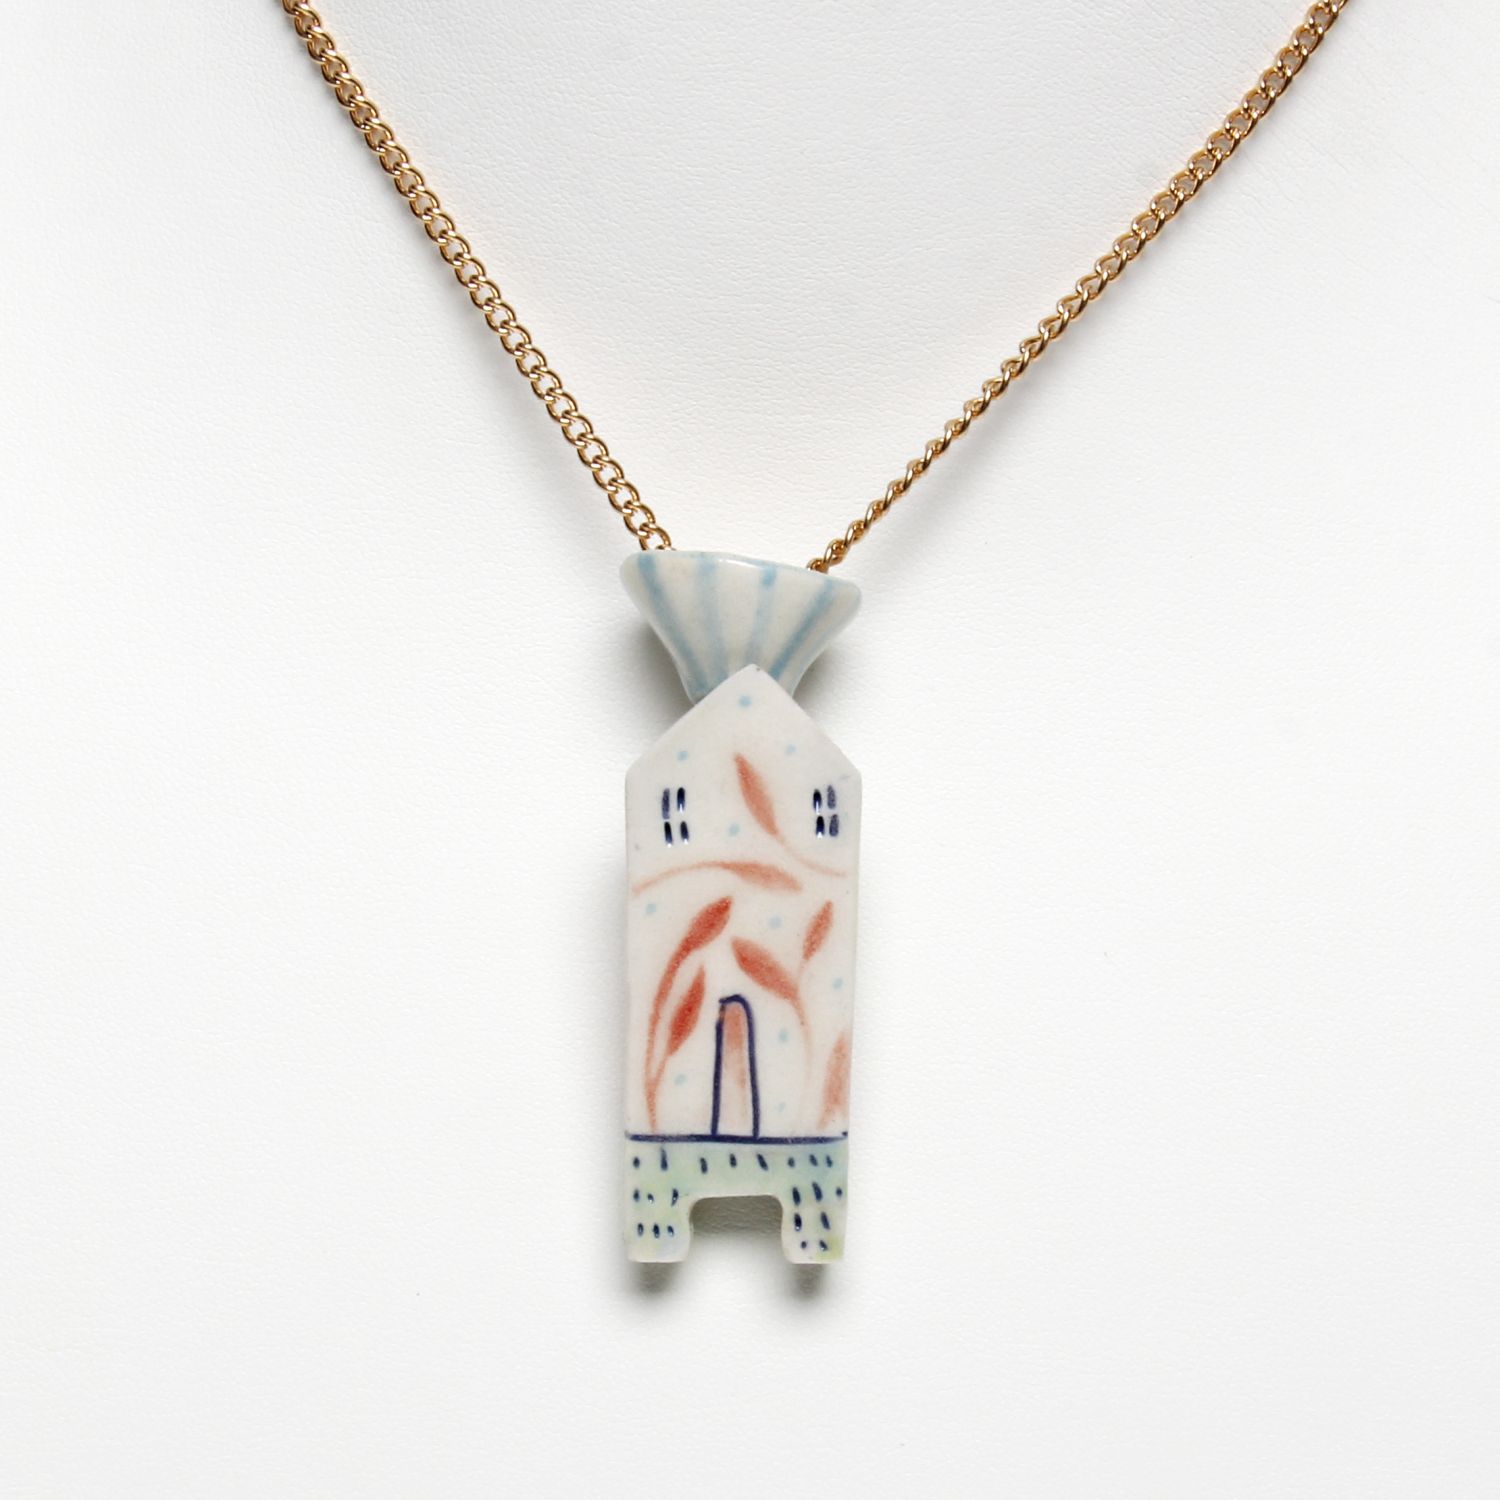 Maria Moldovan: House Pendant Necklace Product Image 3 of 3